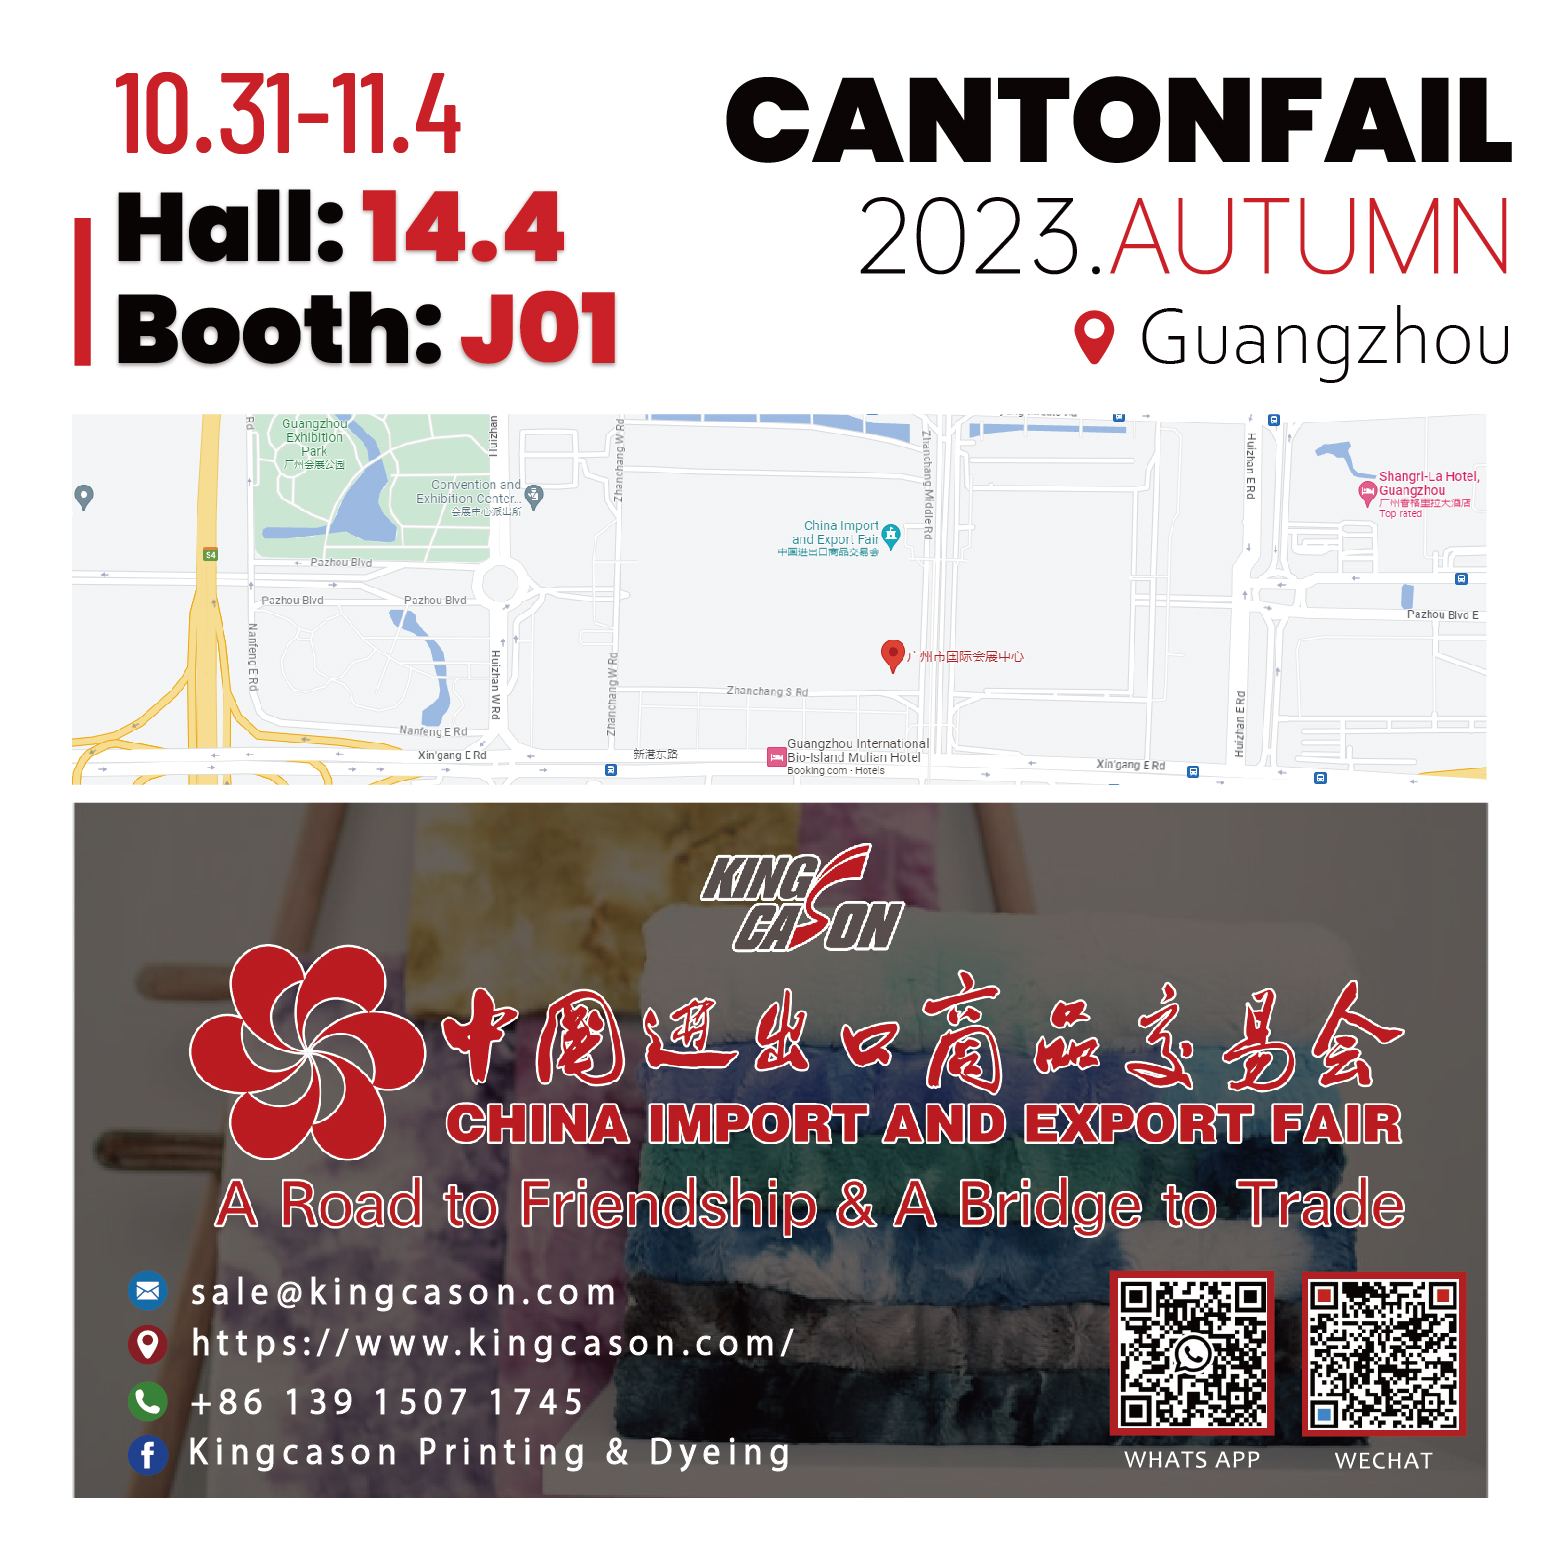 Meet us at the 134th Canton Fair Welcome to Booth J01, Hall 14 (2)